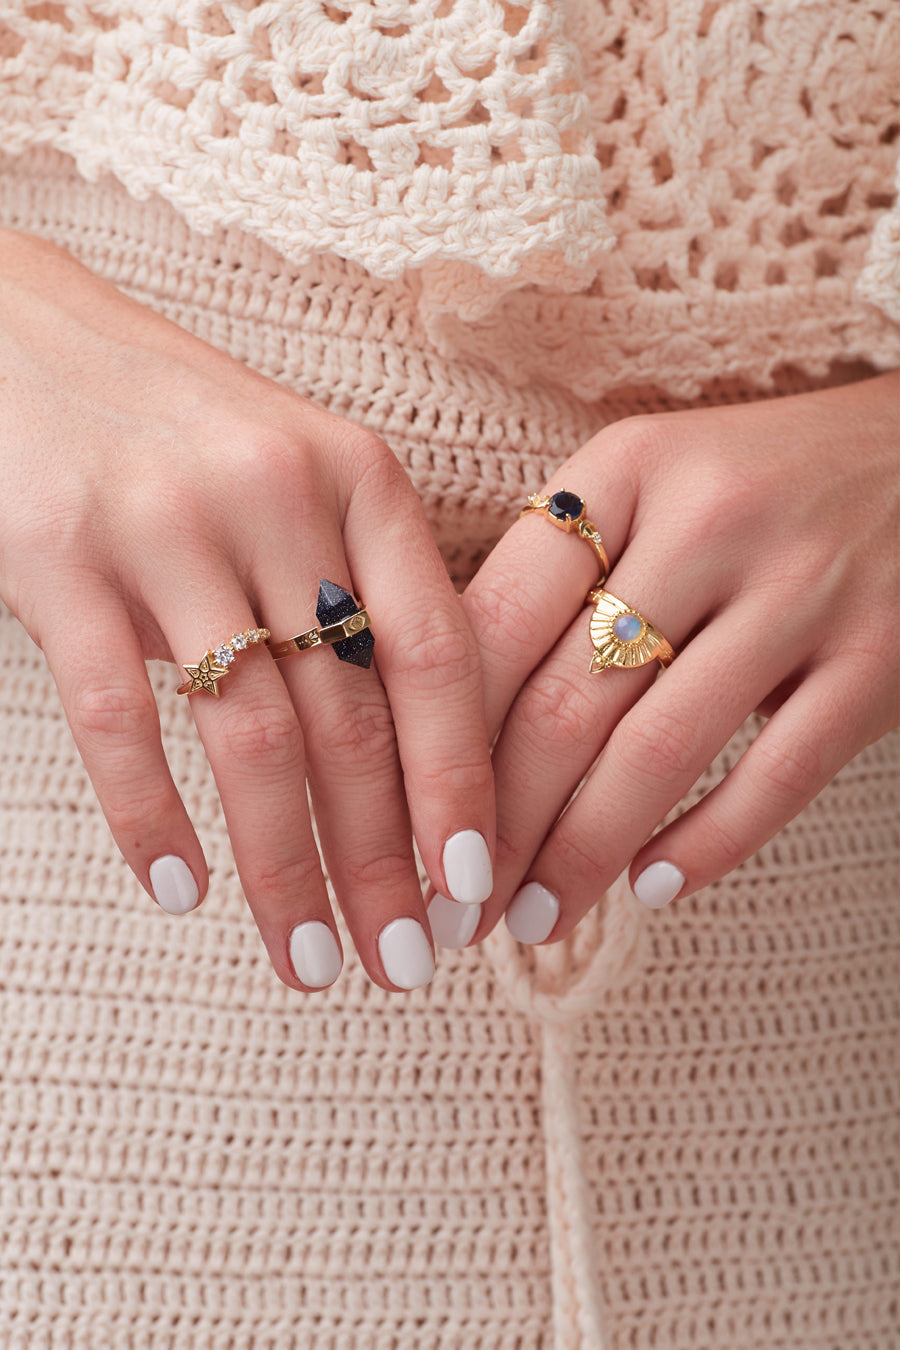 Opal ring and other gemstone rings being worn on hands over cream crochet dress